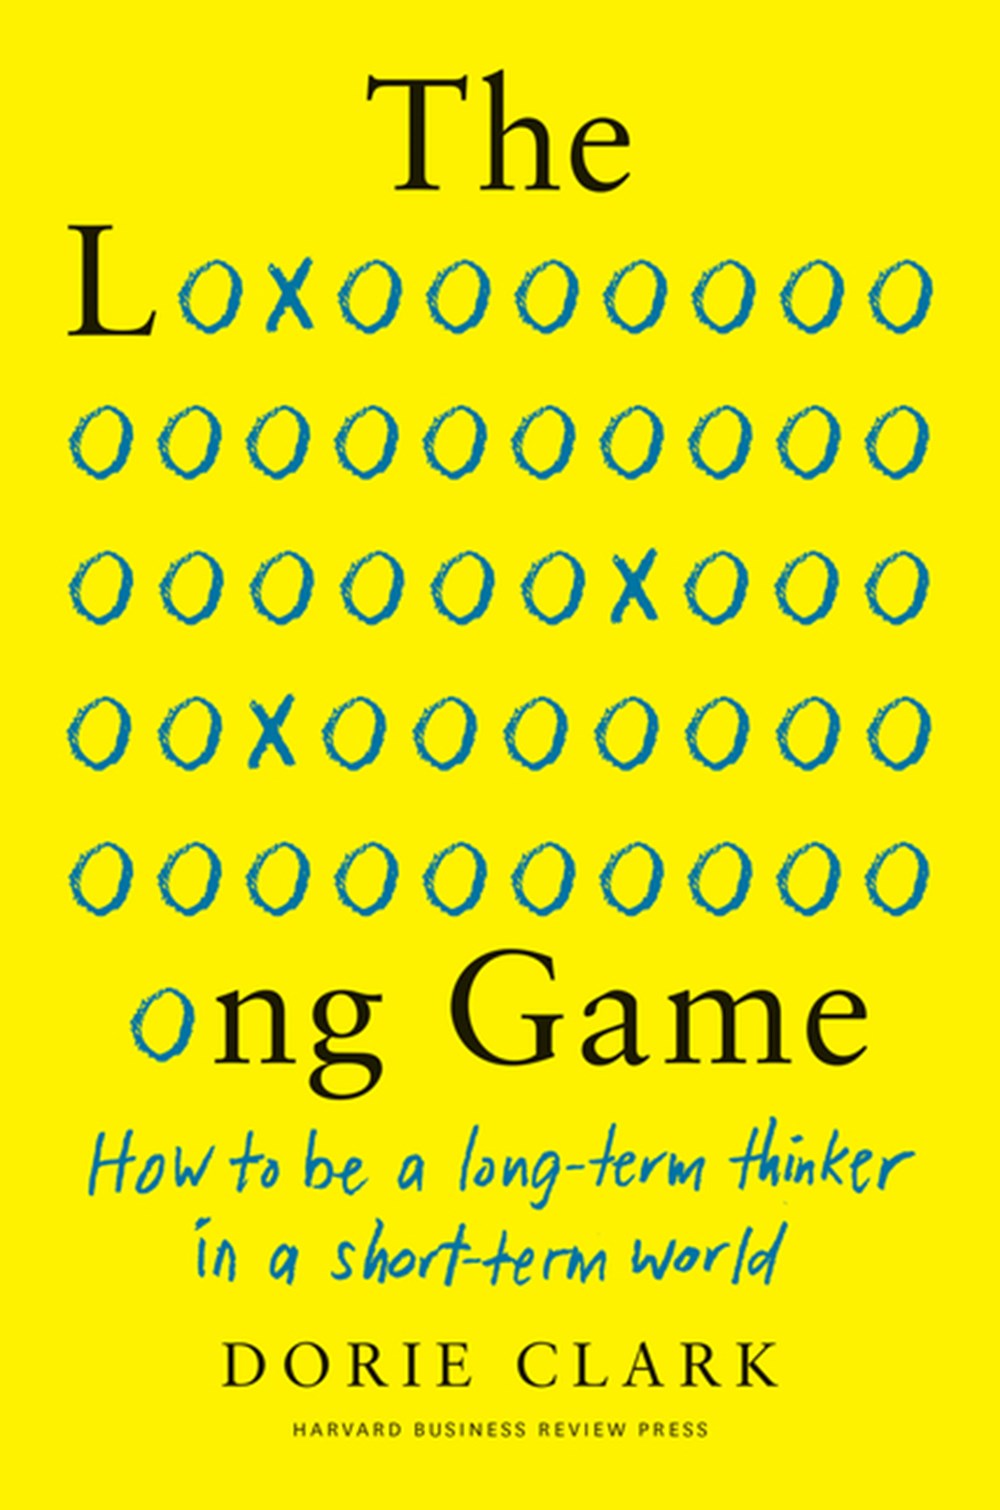 Long Game How to Be a Long-Term Thinker in a Short-Term World